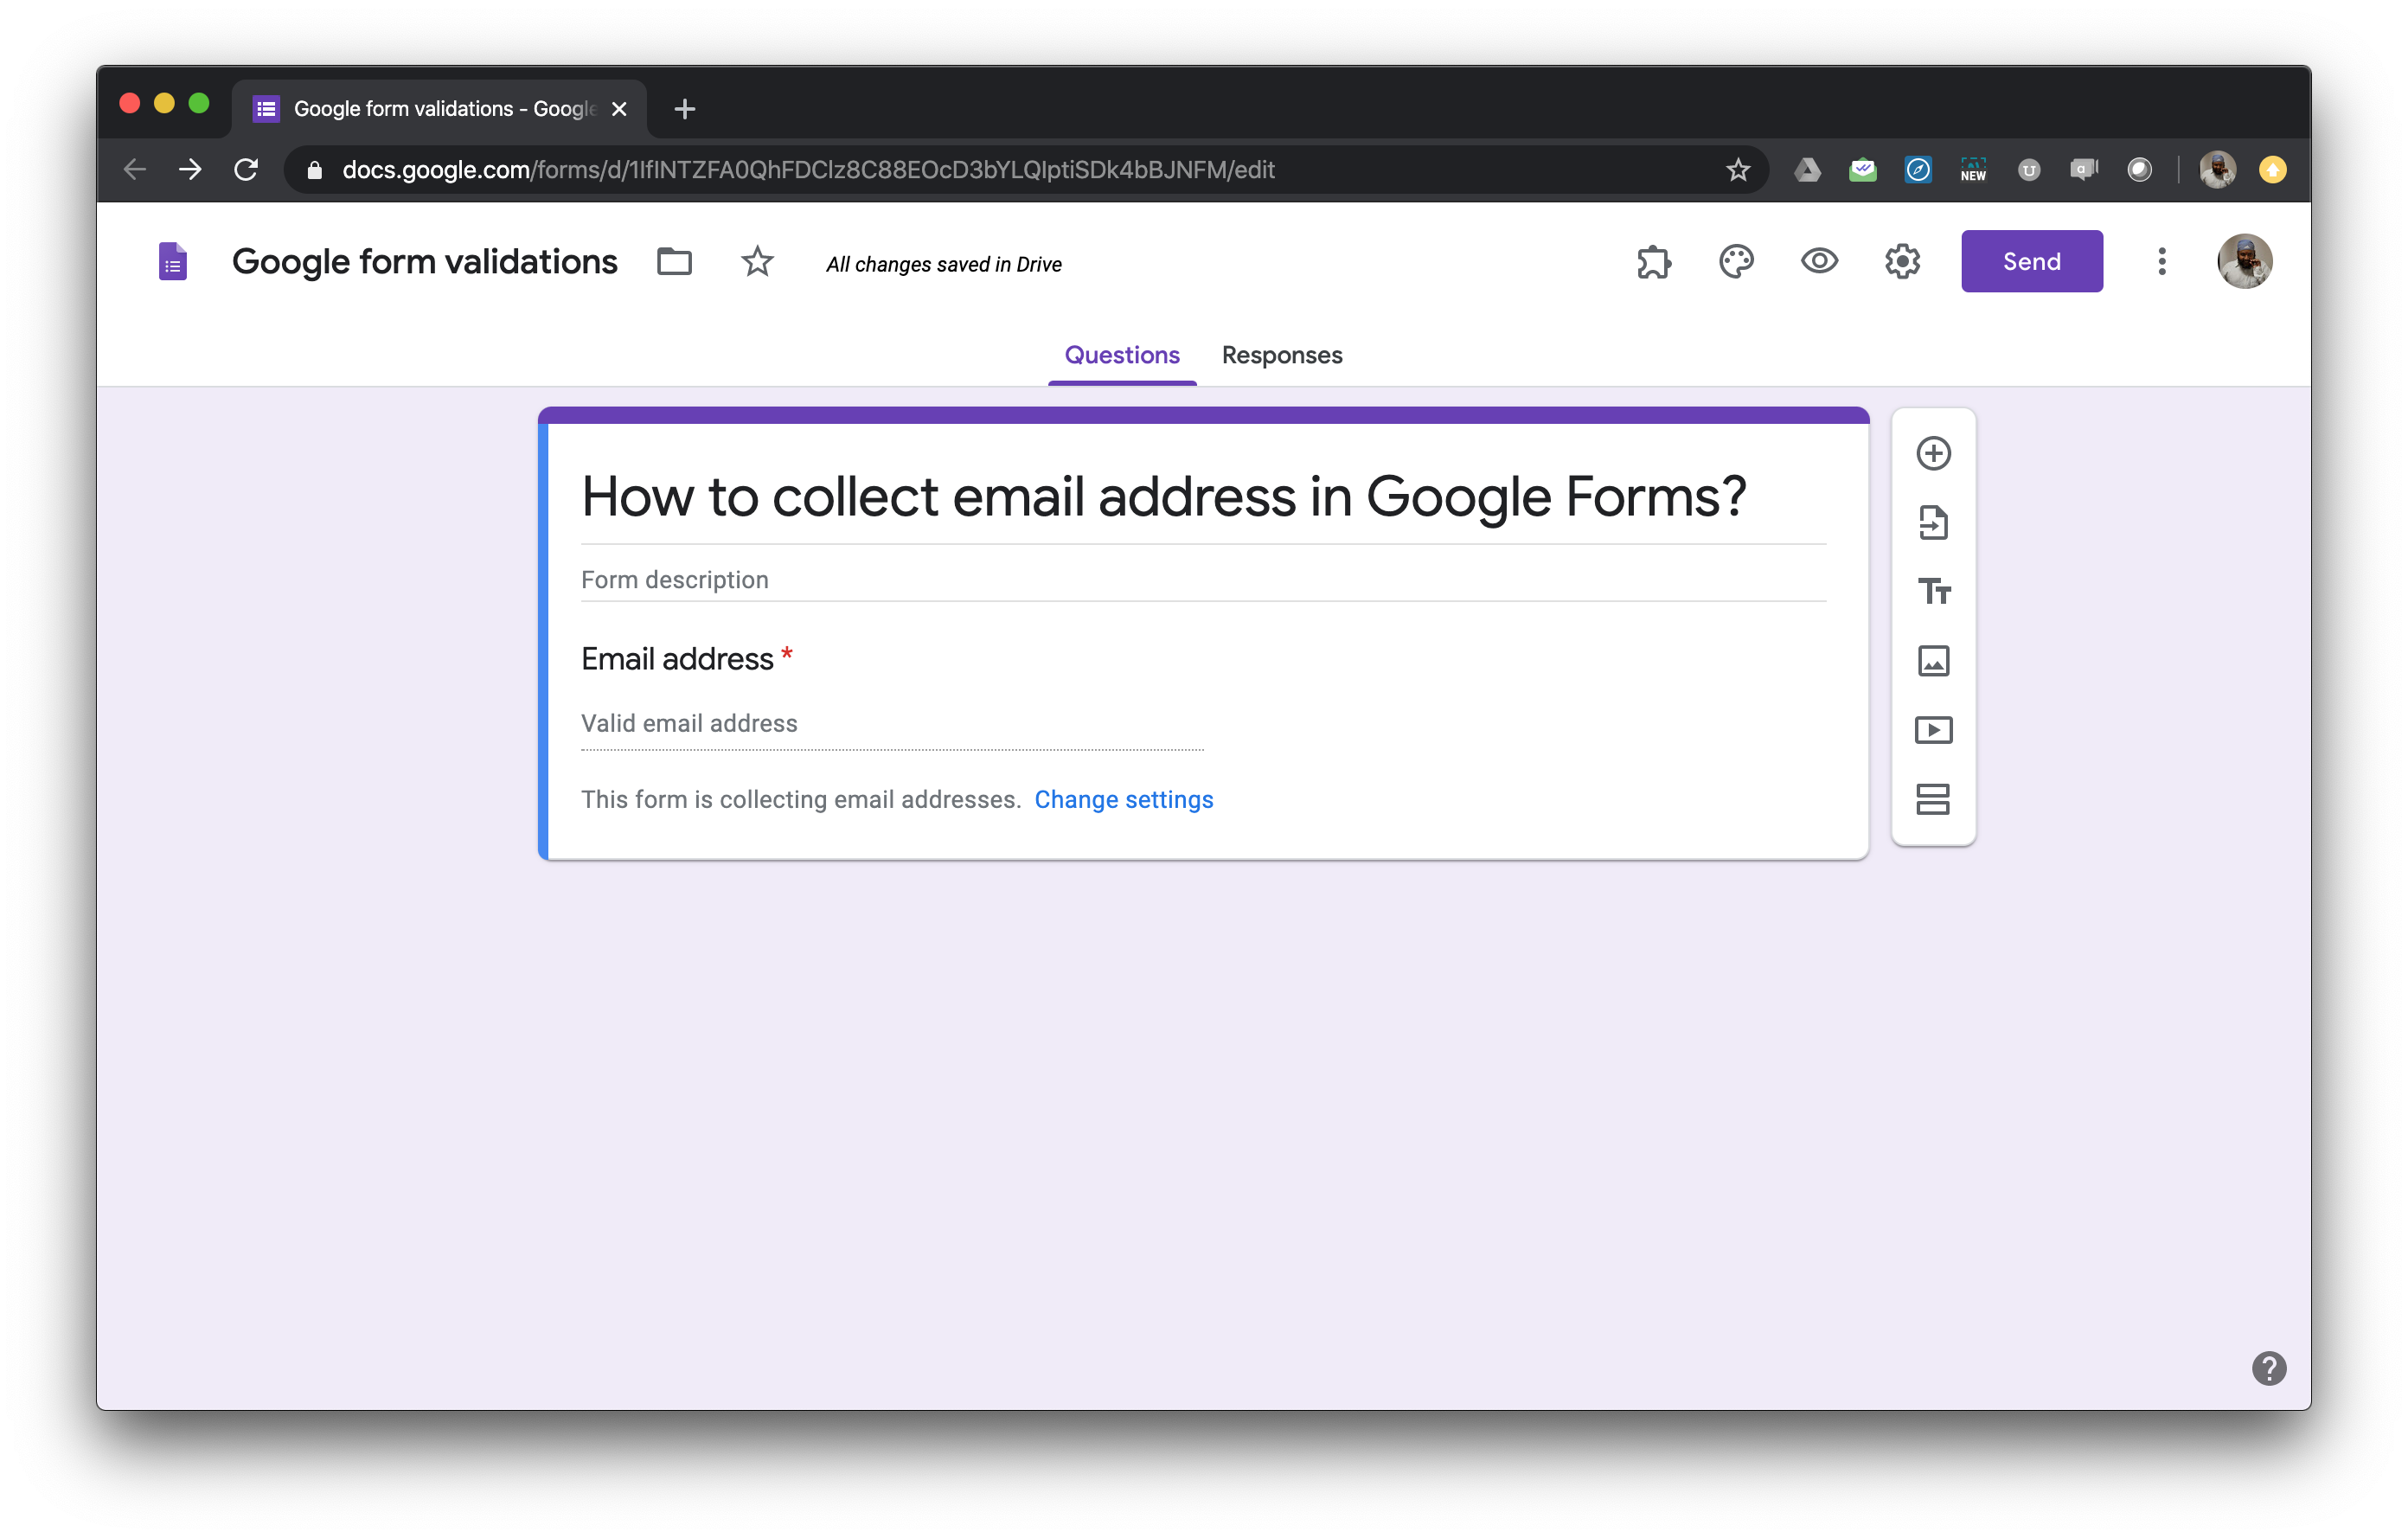 Google Form automatically adds email address as the first field in the form as shown below.